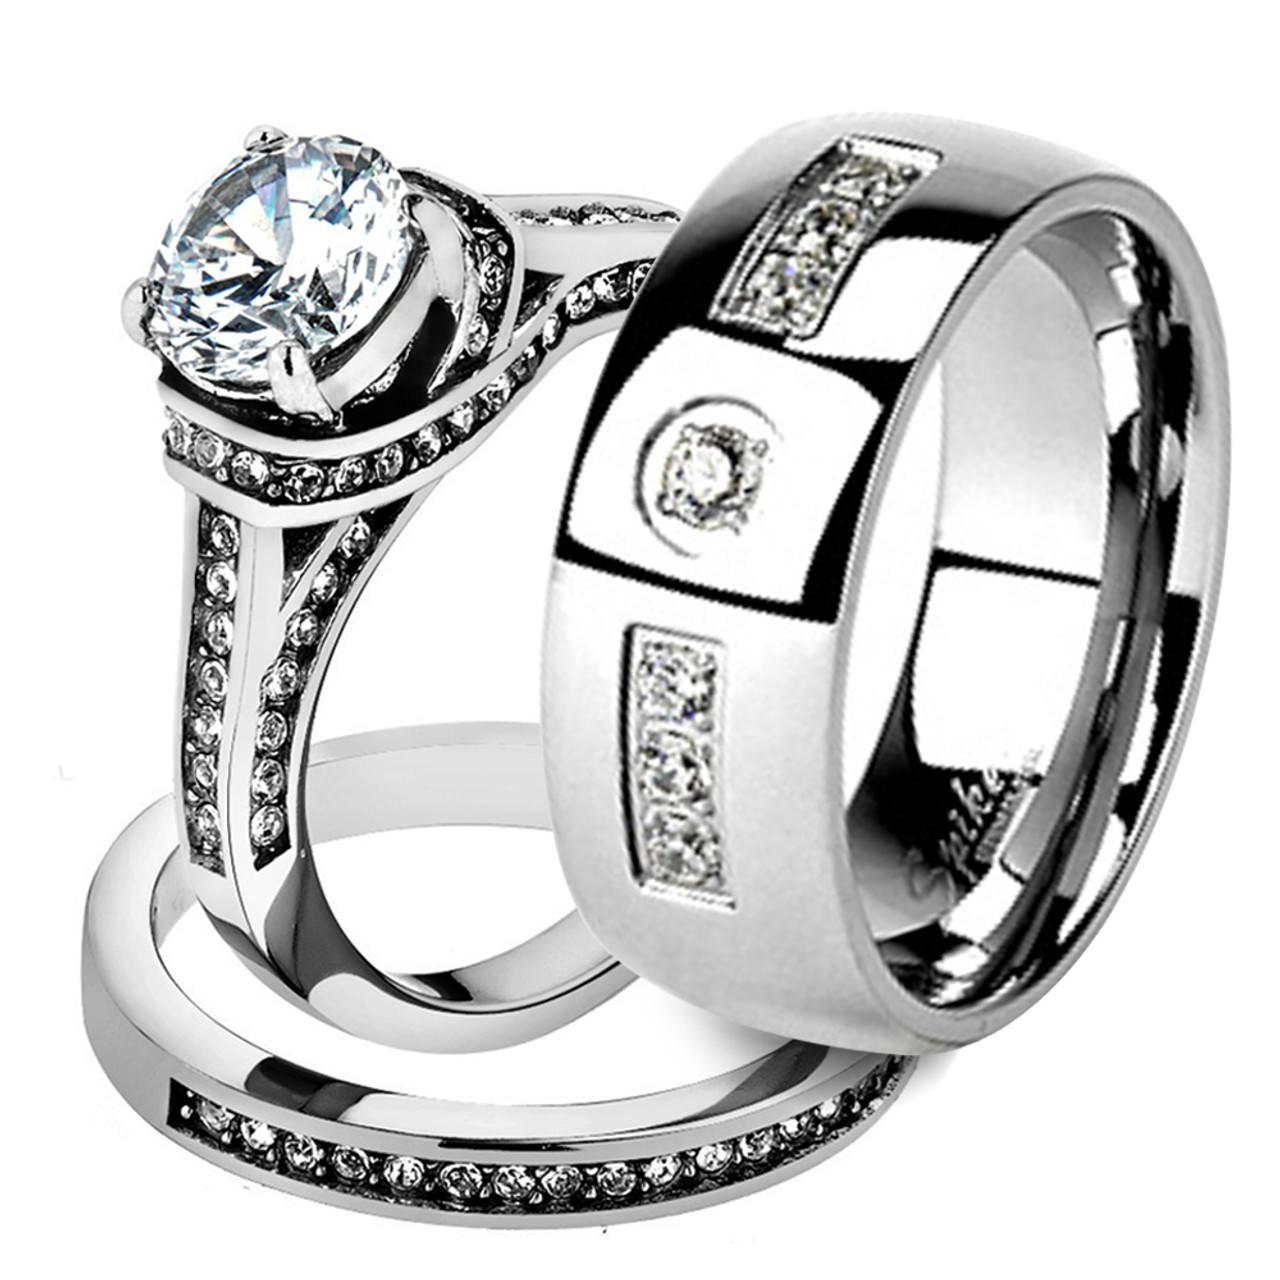 Marimor Jewelry His and Hers Stainless Steel Princess Wedding Ring Set & Beveled Edge Wedding Band